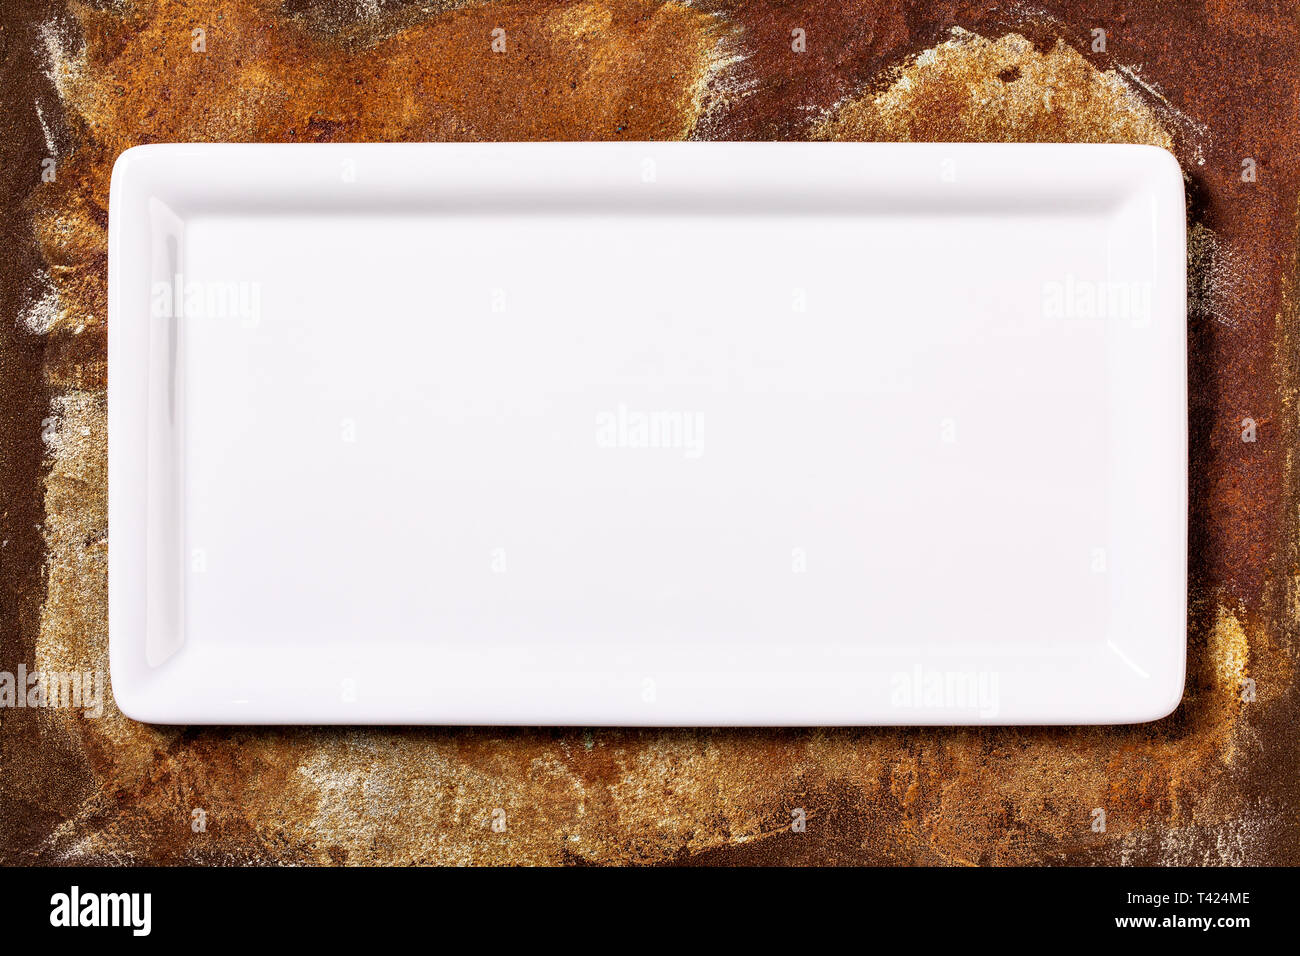 Empty white cornered plate on rusted metal background, top view Stock Photo